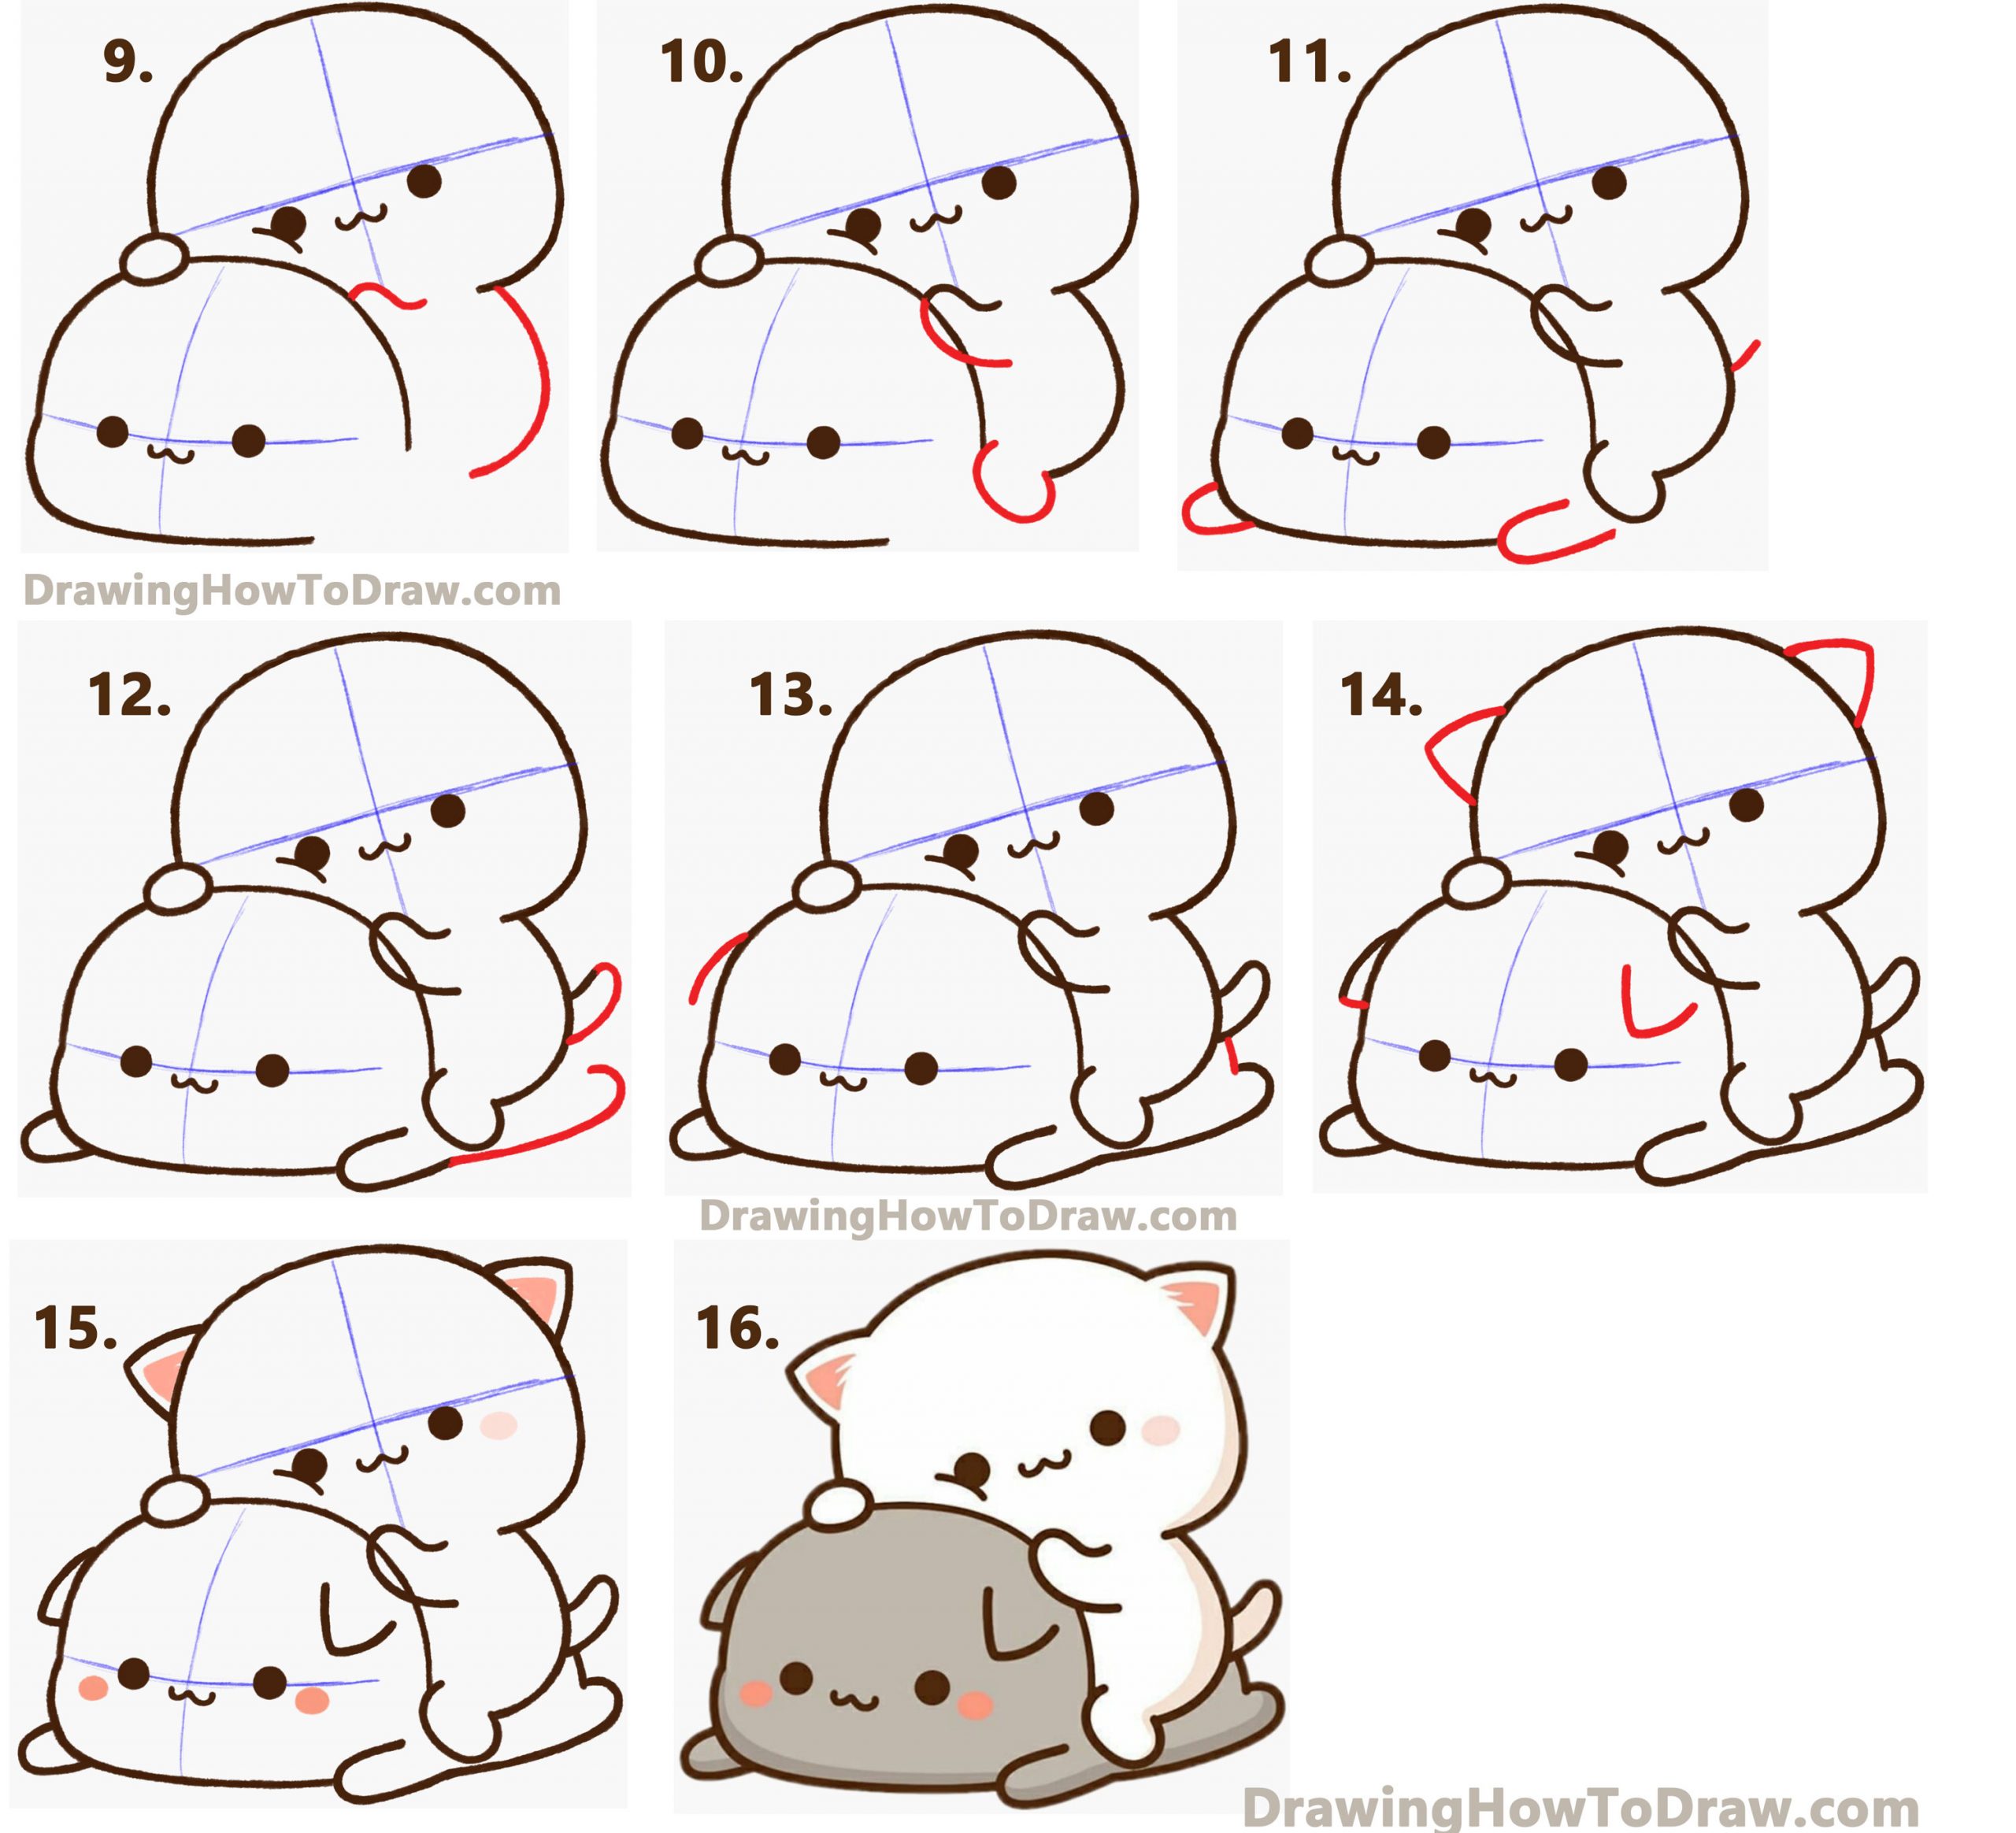 Learn How to Draw 2 Cats from Peach Goma (Super Cute / Kawaii) Easy Step by Step Drawing Tutorial